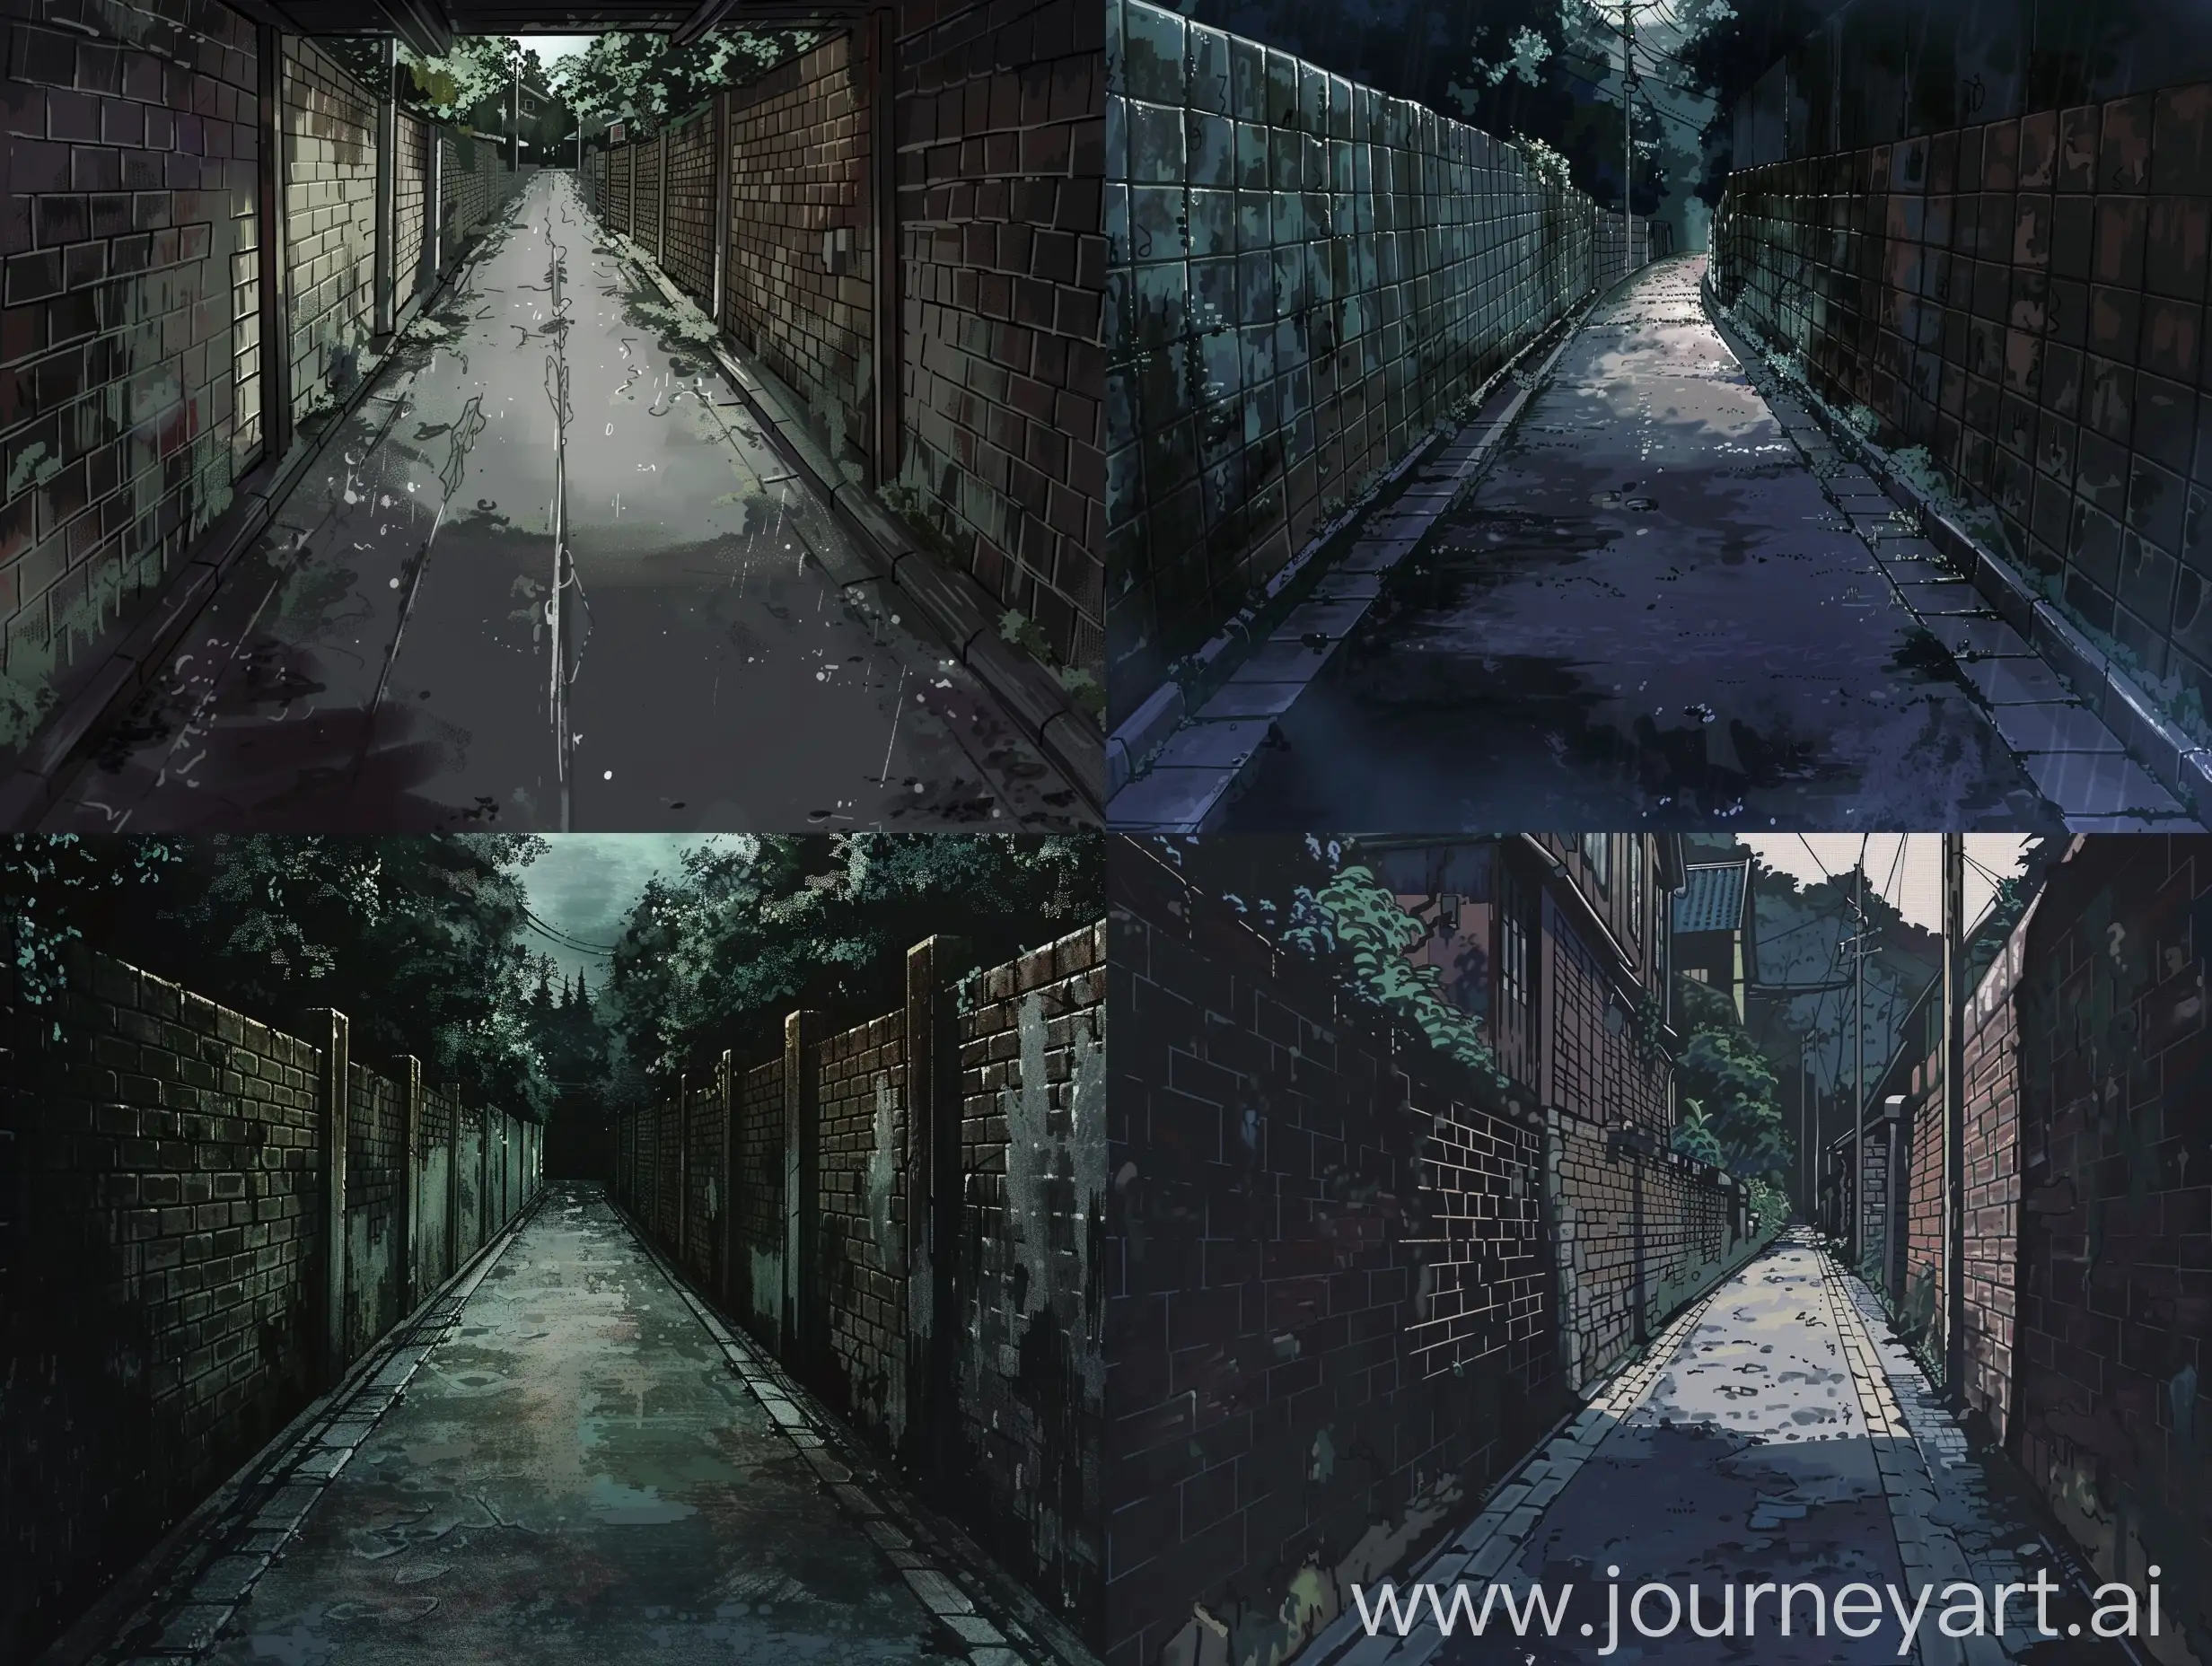 dark and gloomy street alley, there is a road ahead, it is surrounded by brick walls on both sides, anime style